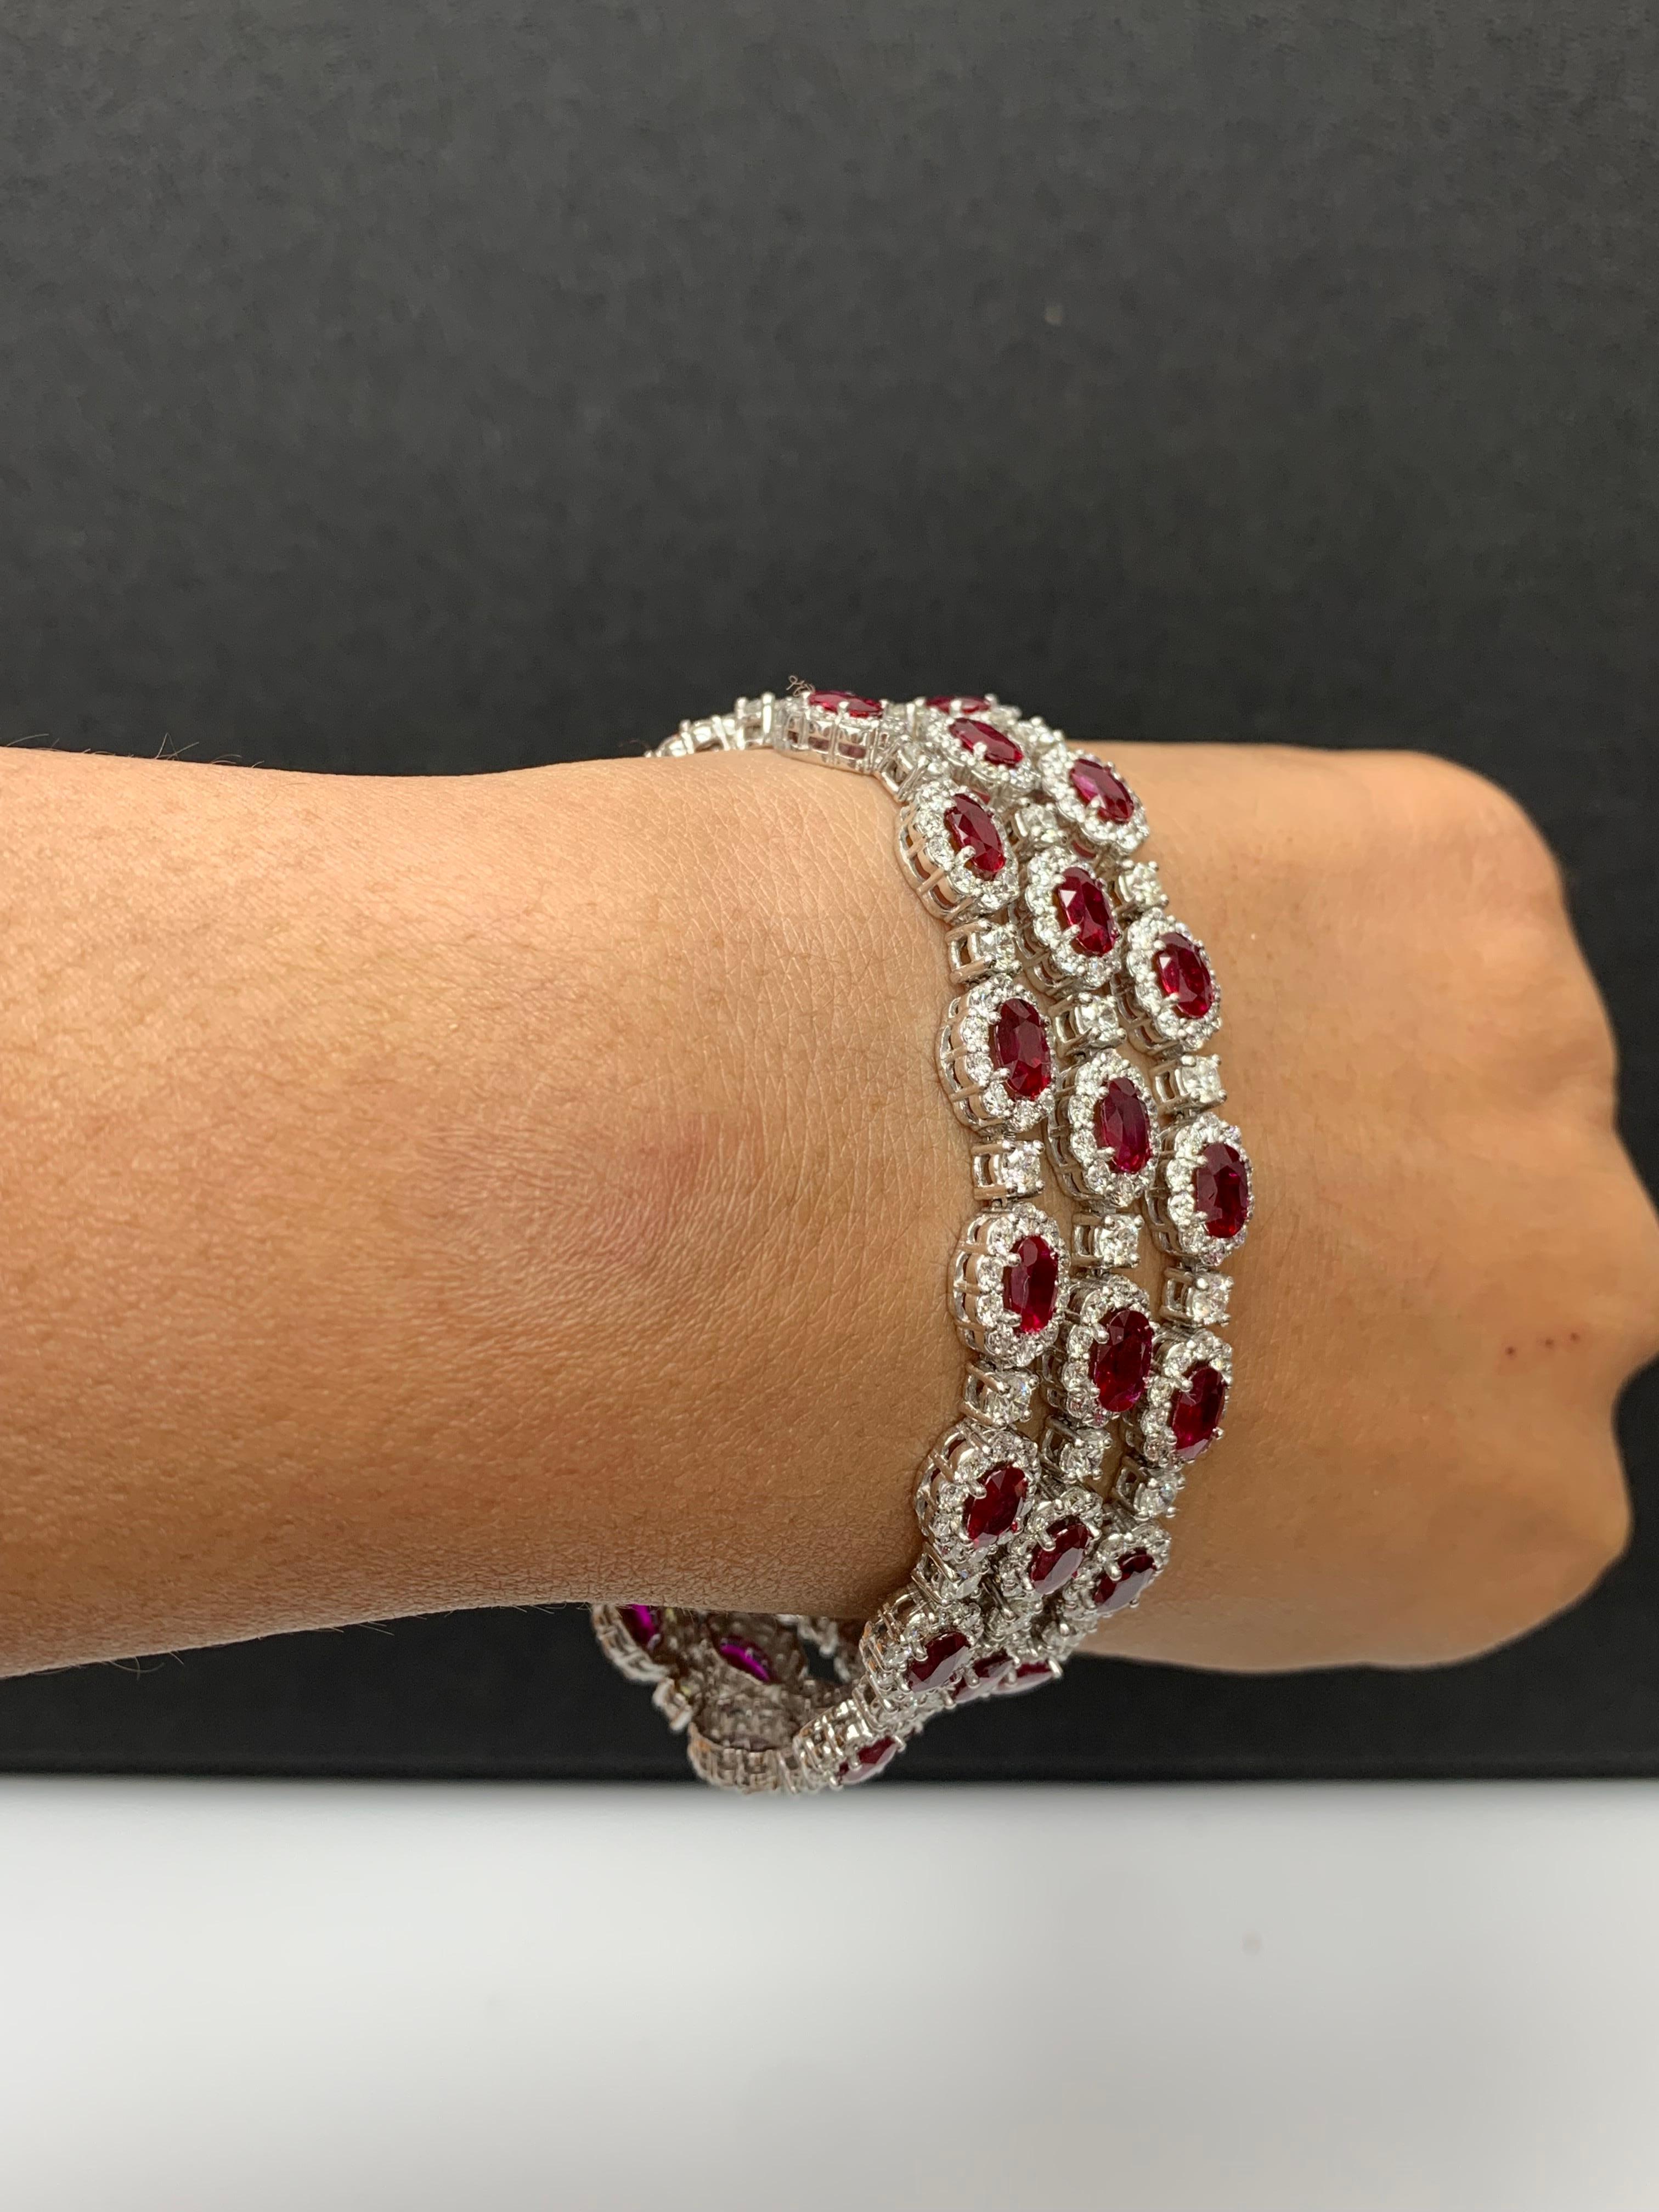 18.01 Carat Oval Cut Ruby and Diamond 3 Row Bracelet in 14K White Gold For Sale 1